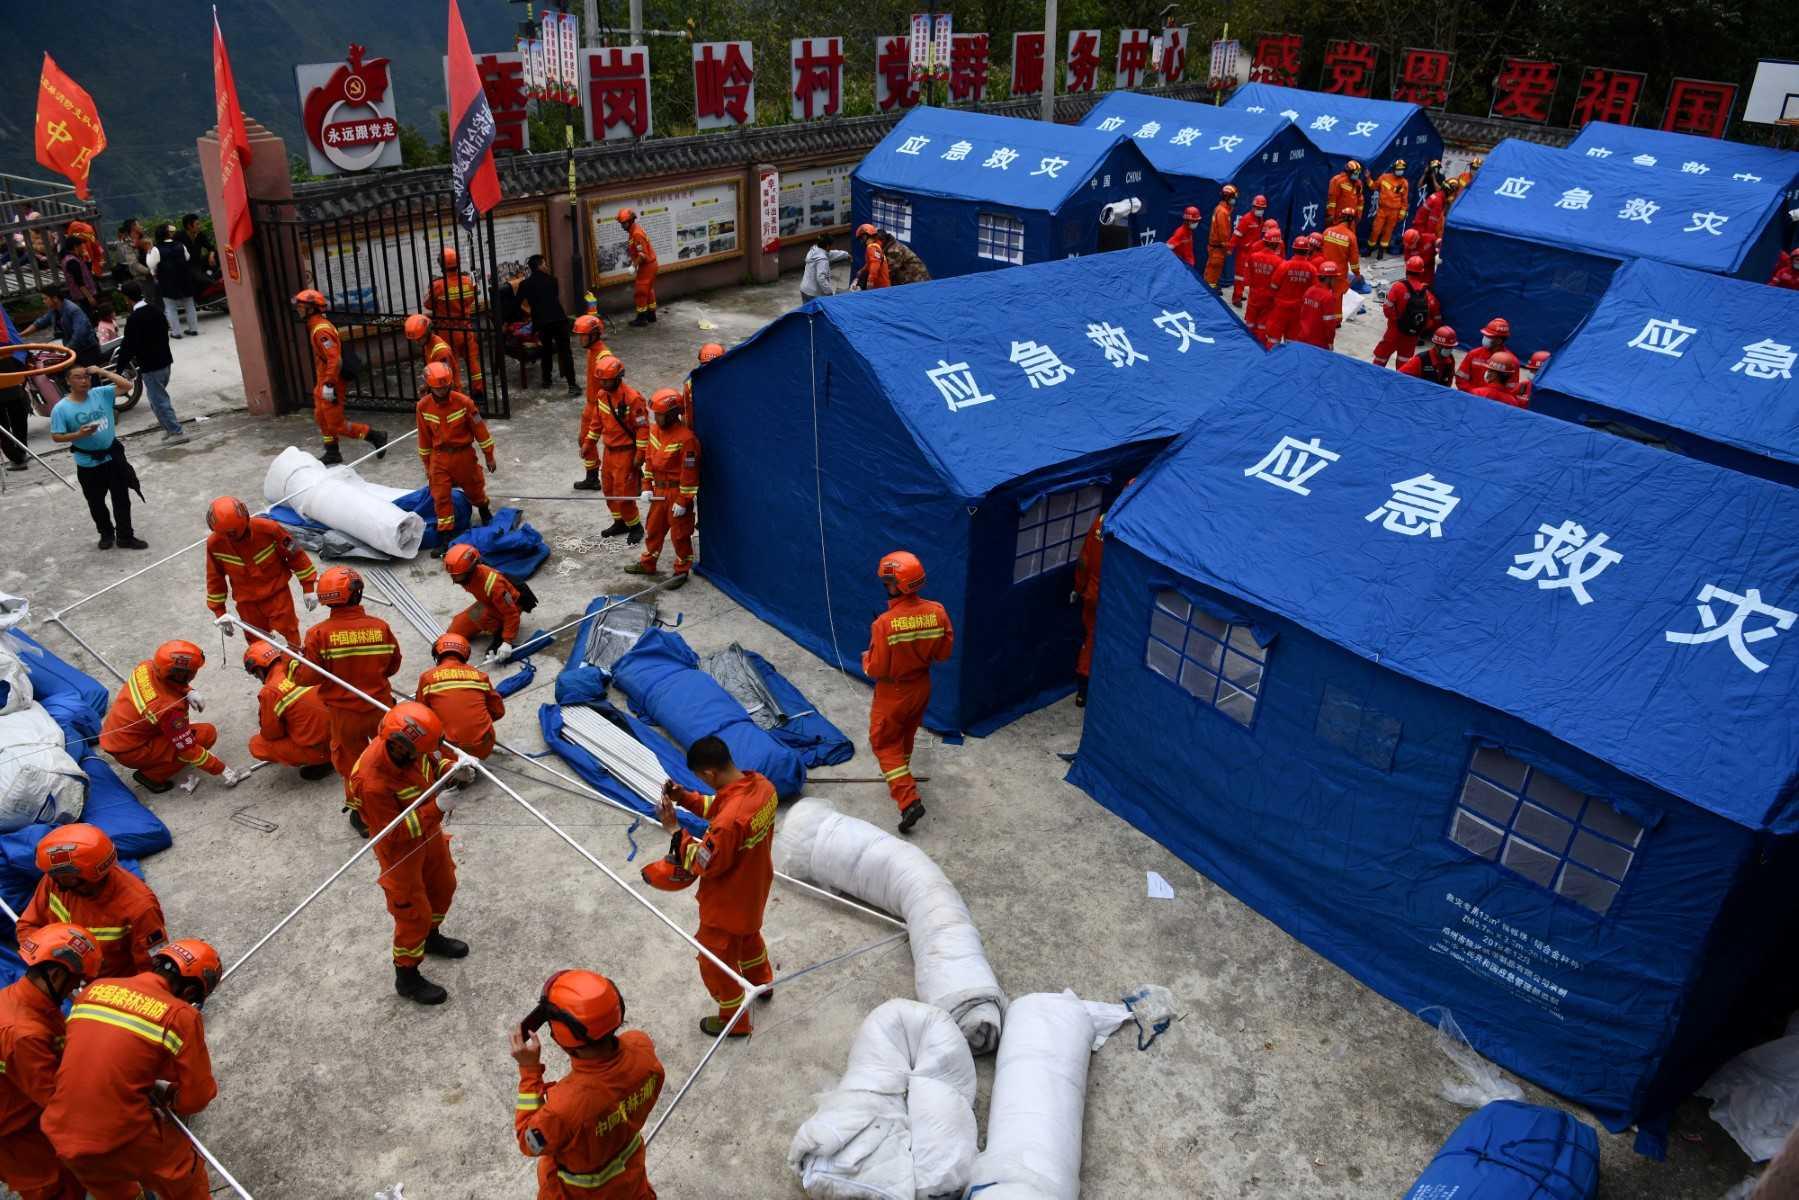 This photo taken on Sept 7 shows rescuers setting up tents for people displaced after a 6.6-magnitude earthquake that struck Sept 5, in Luding county, Ganzi Prefecture, in China's southwestern Sichuan province. Photo: AFP 